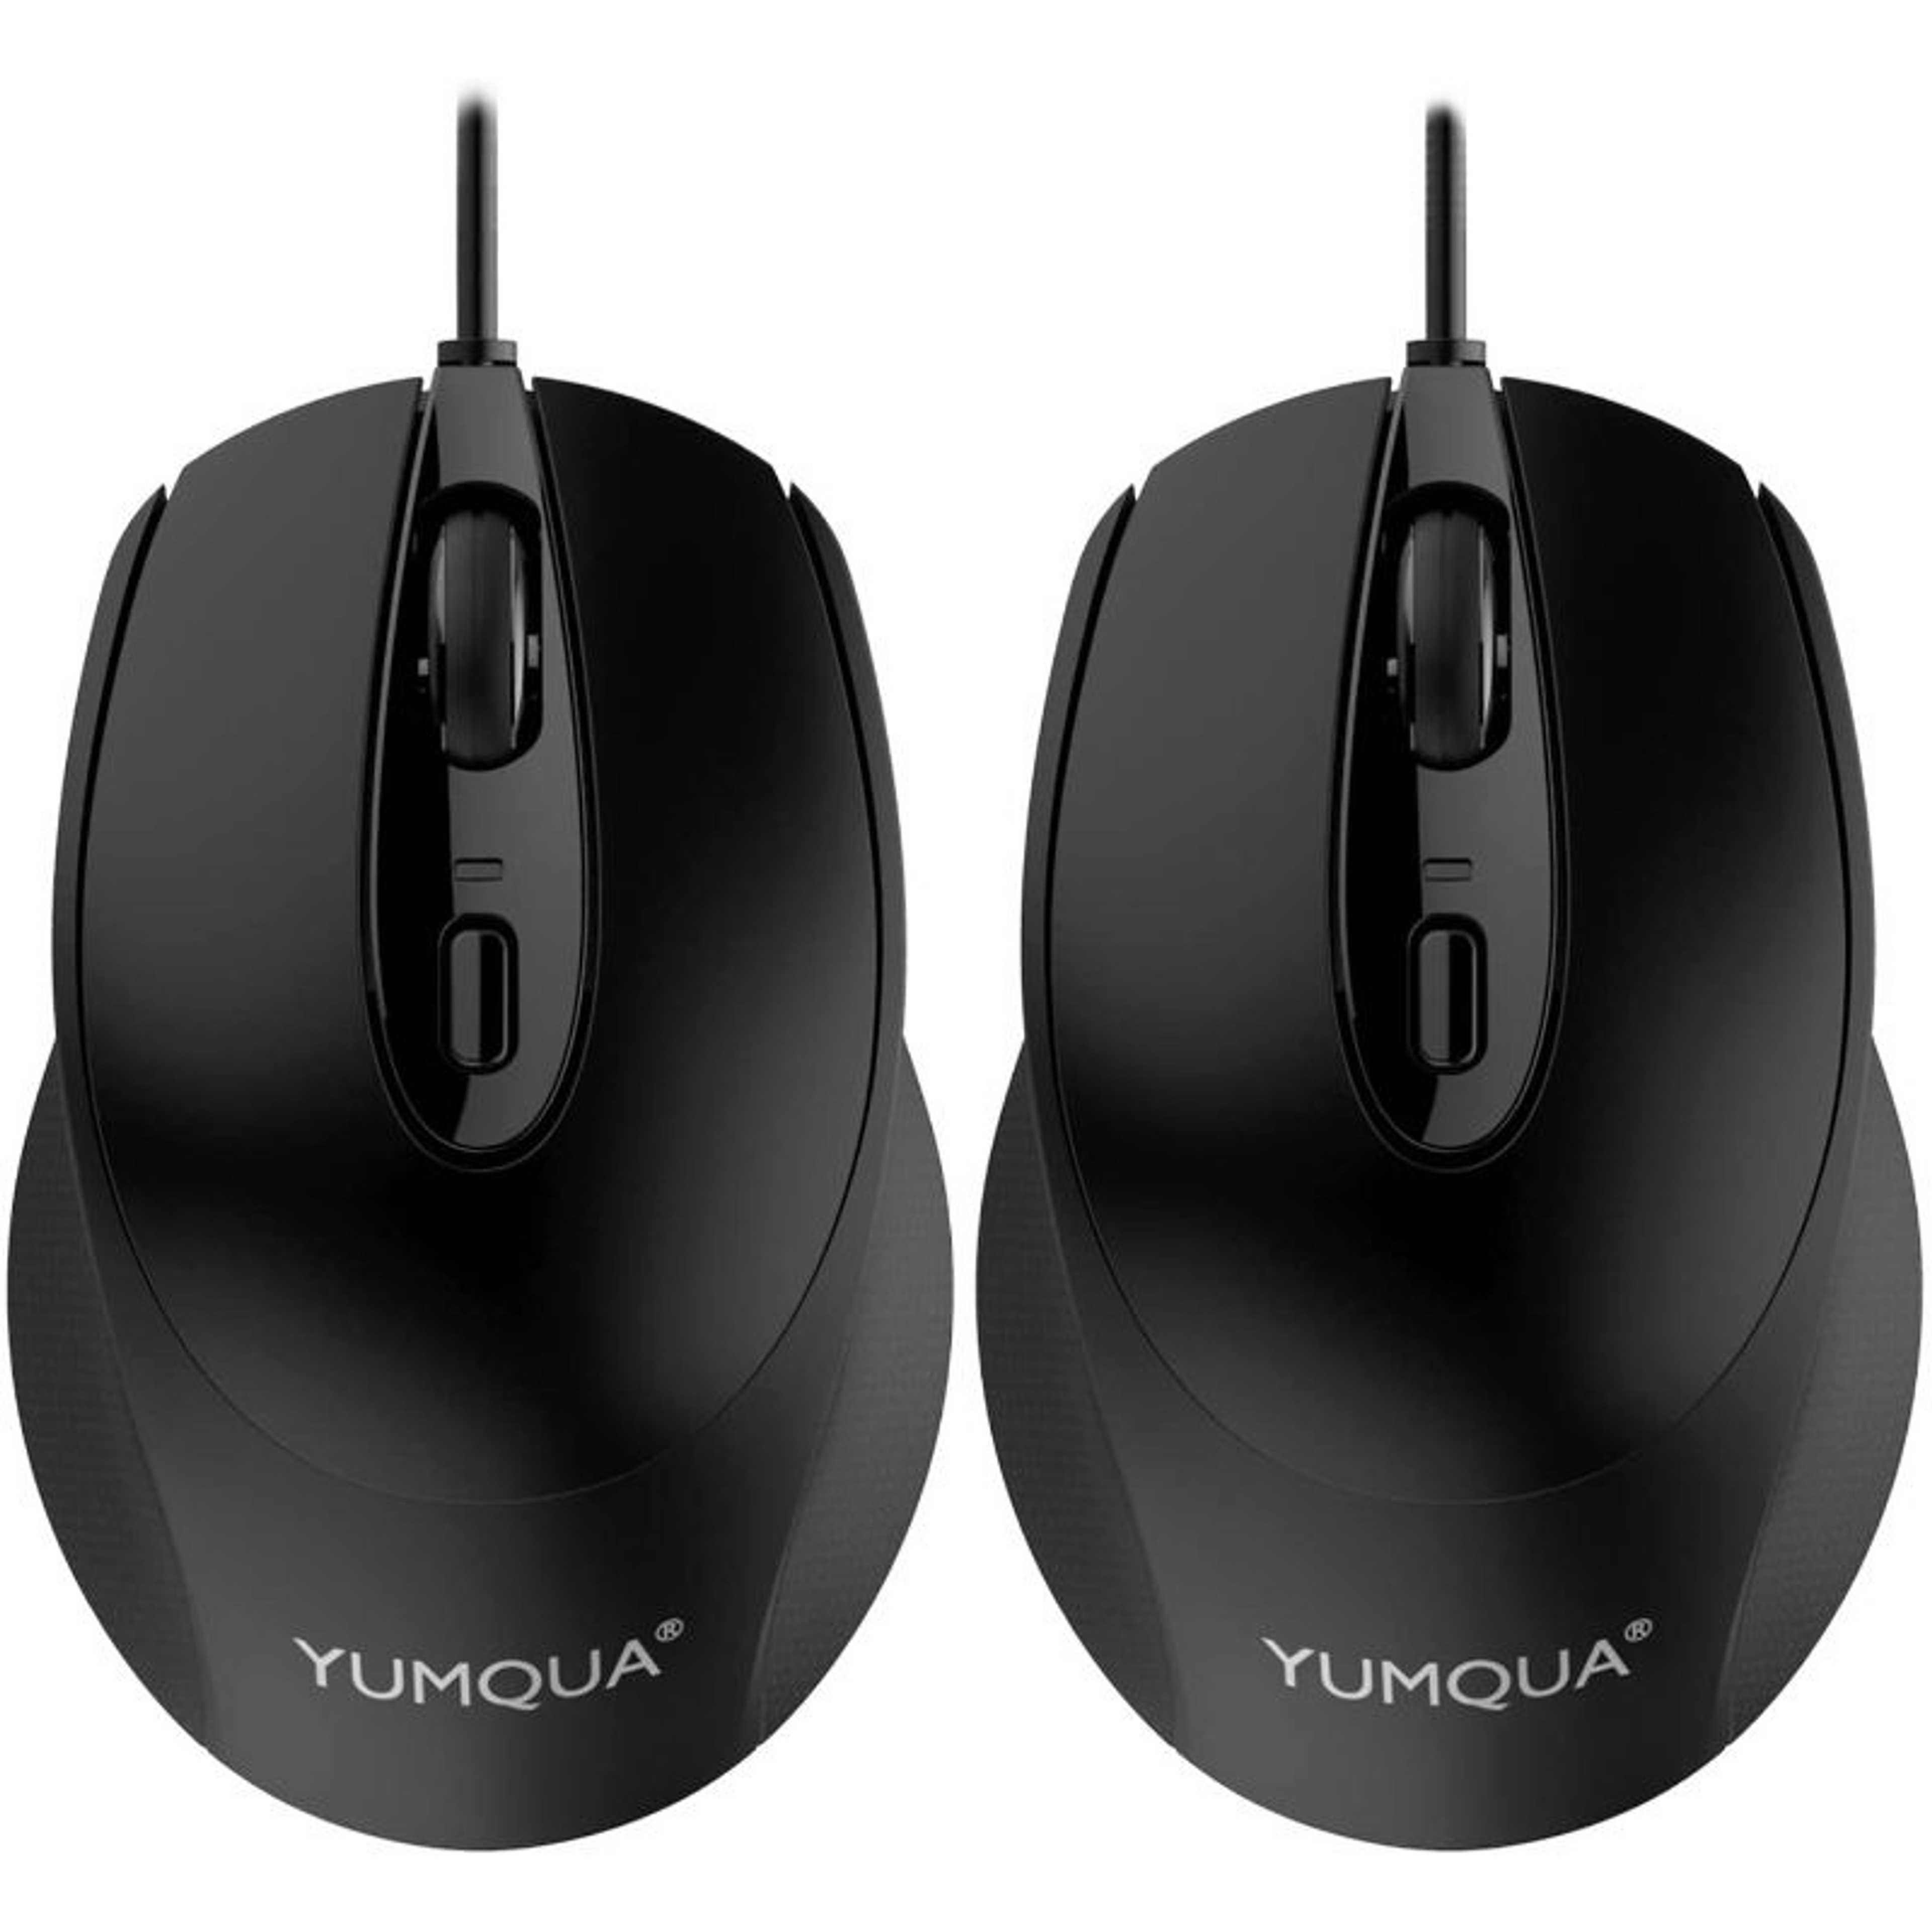 YUMQUA G222 SILENT WIRED COMPUTER MOUSE WITH 2 ADJUSTABLE DPI